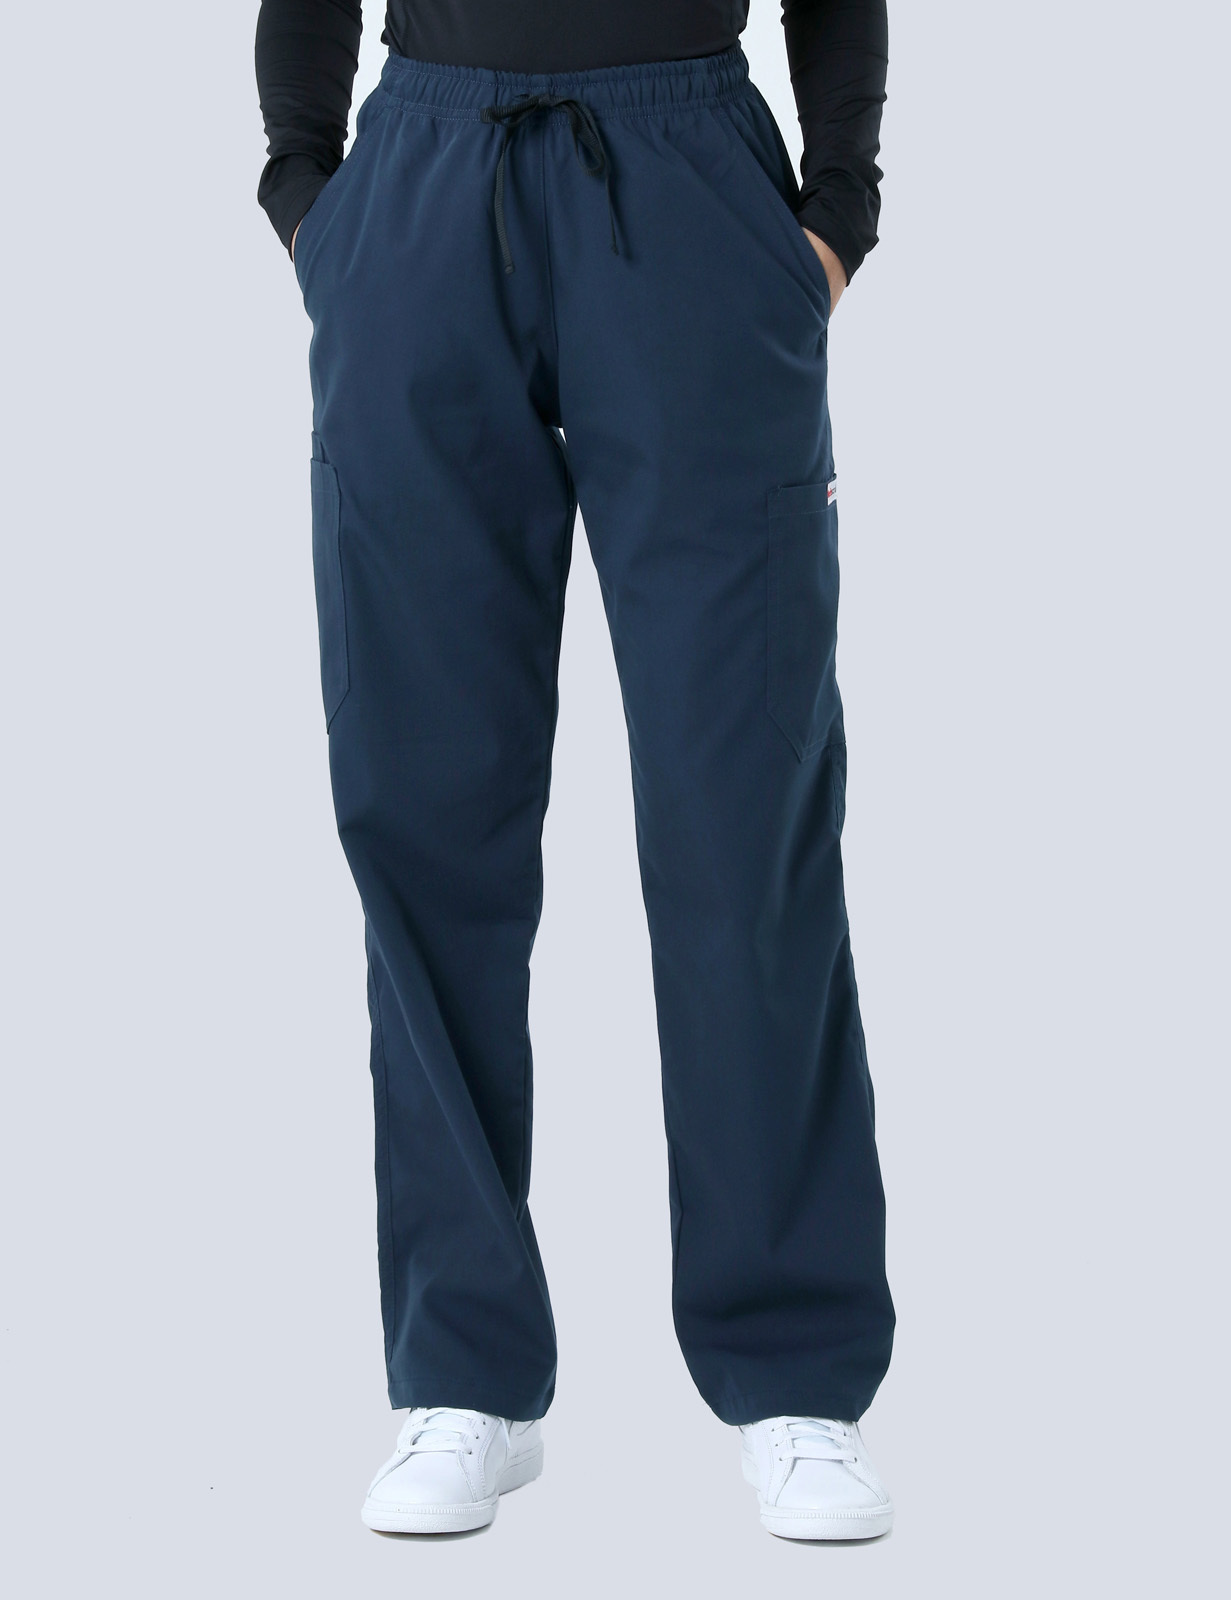 VVED - Women's 4 Pocket Scrub Top and Cargo Pants in Navy (Incl Logo)